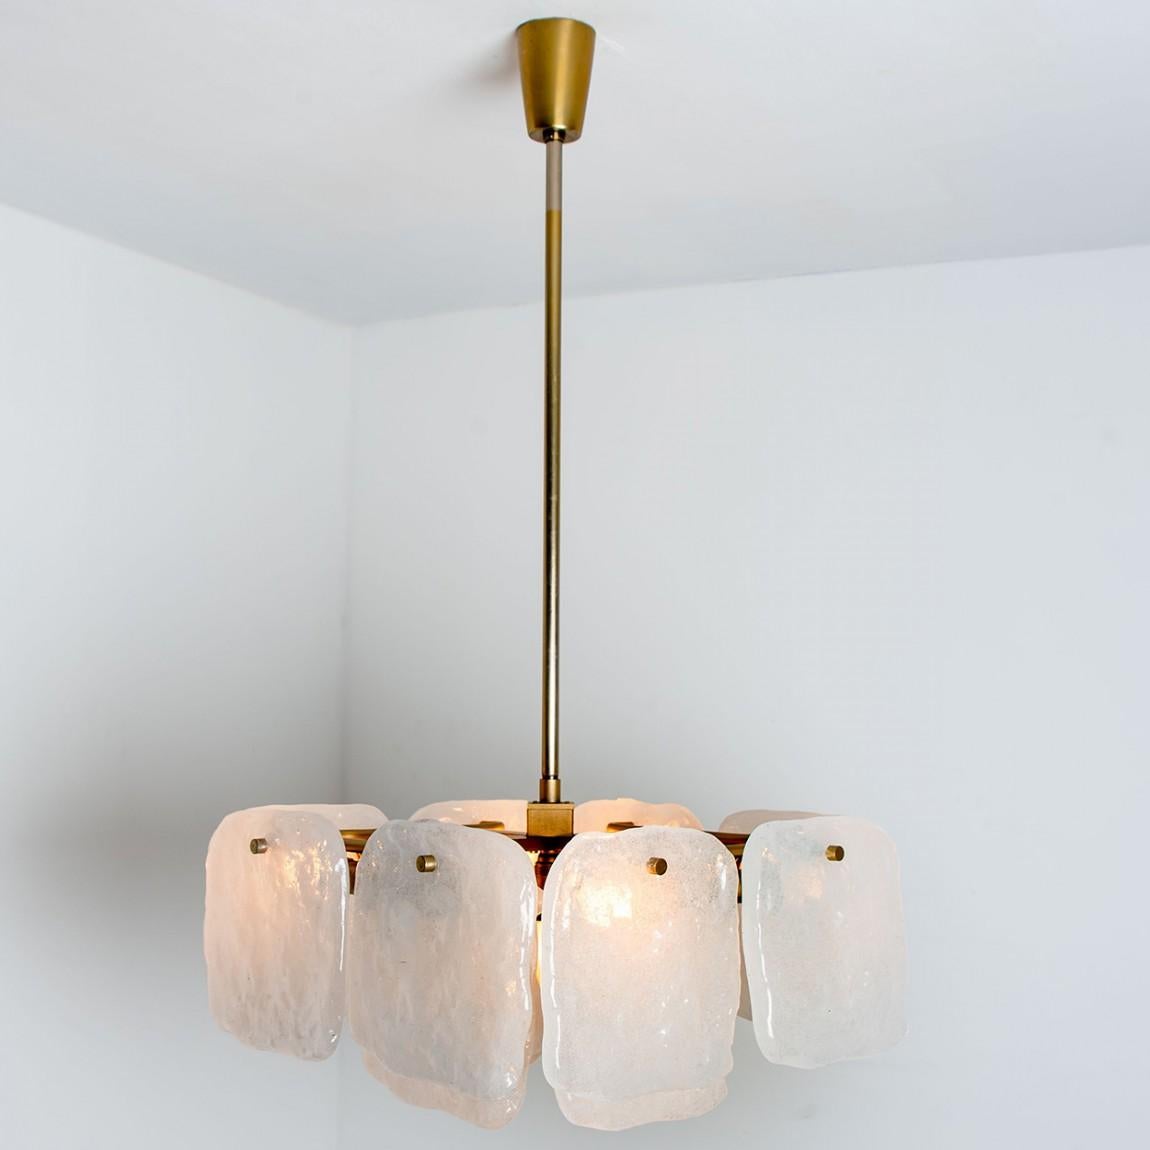 Set of Glass and Brass Light Fixtures Designed by J.T Kalmar, Austria, 1960s For Sale 4